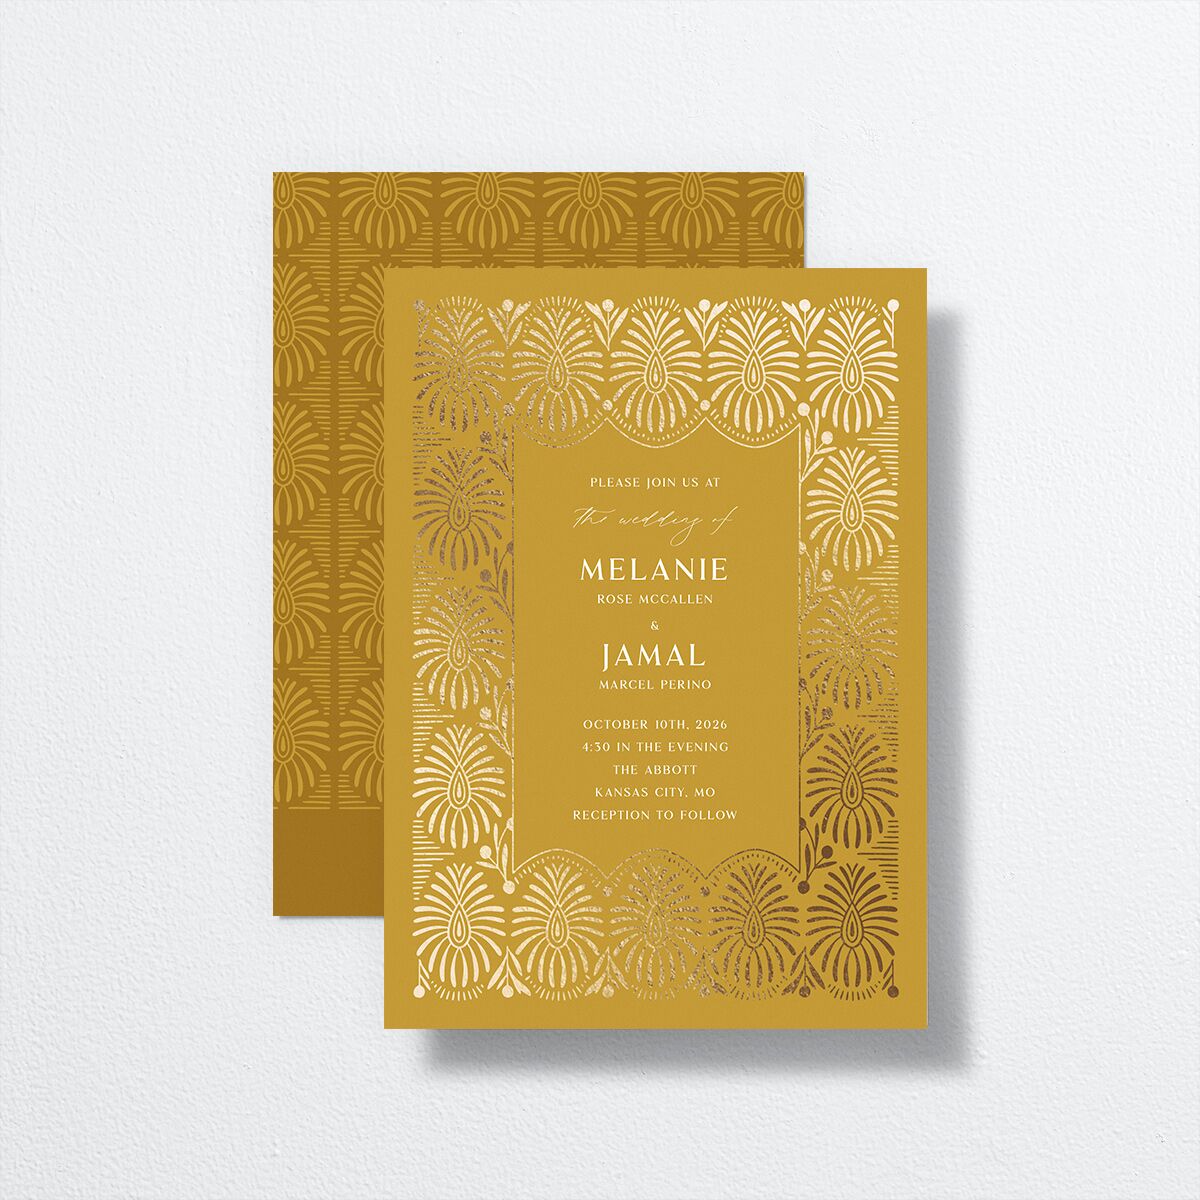 Woven Frame Wedding Invitations front-and-back in yellow